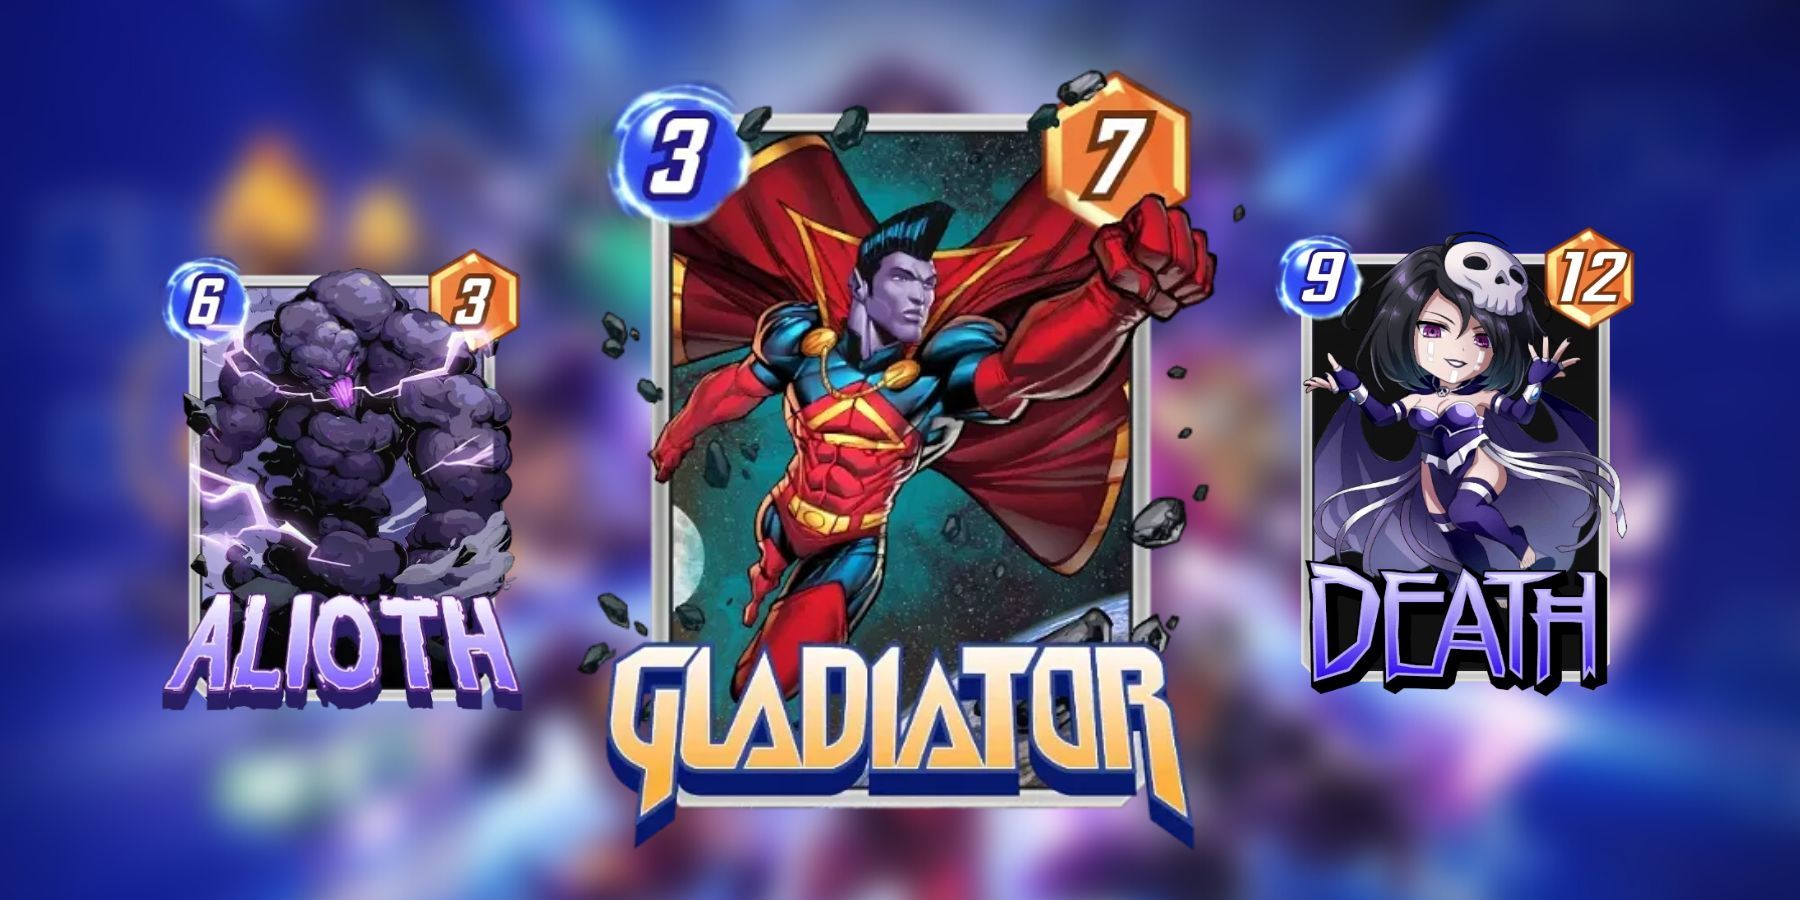 gladiator, alioth, and death in marvel snap.